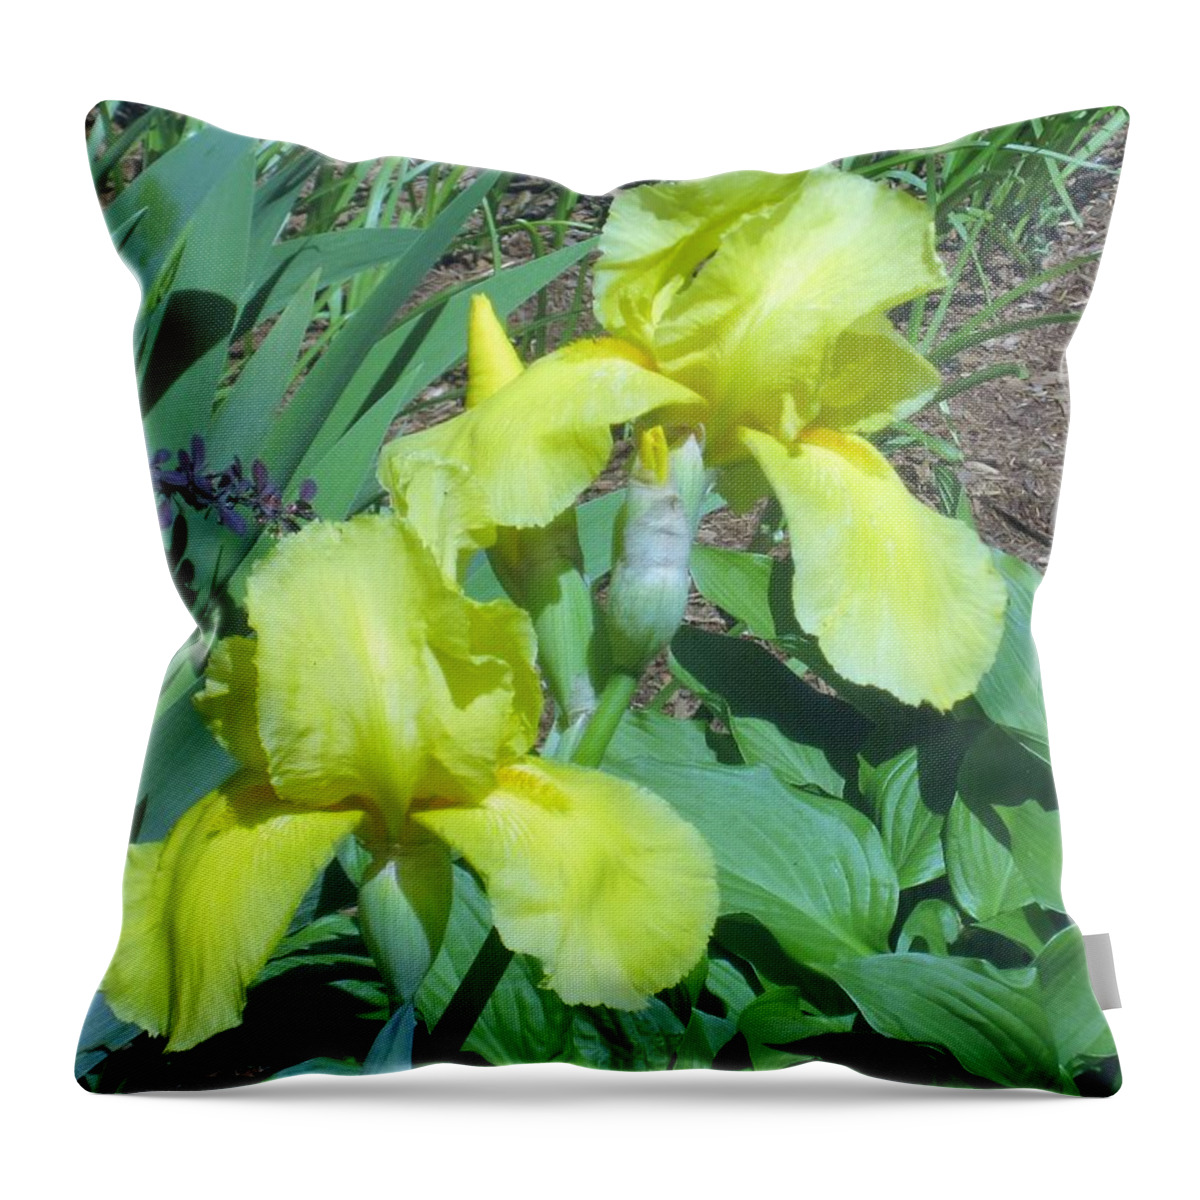 Yellow Irish Throw Pillow featuring the photograph Bright Yellow by Paul Meinerth